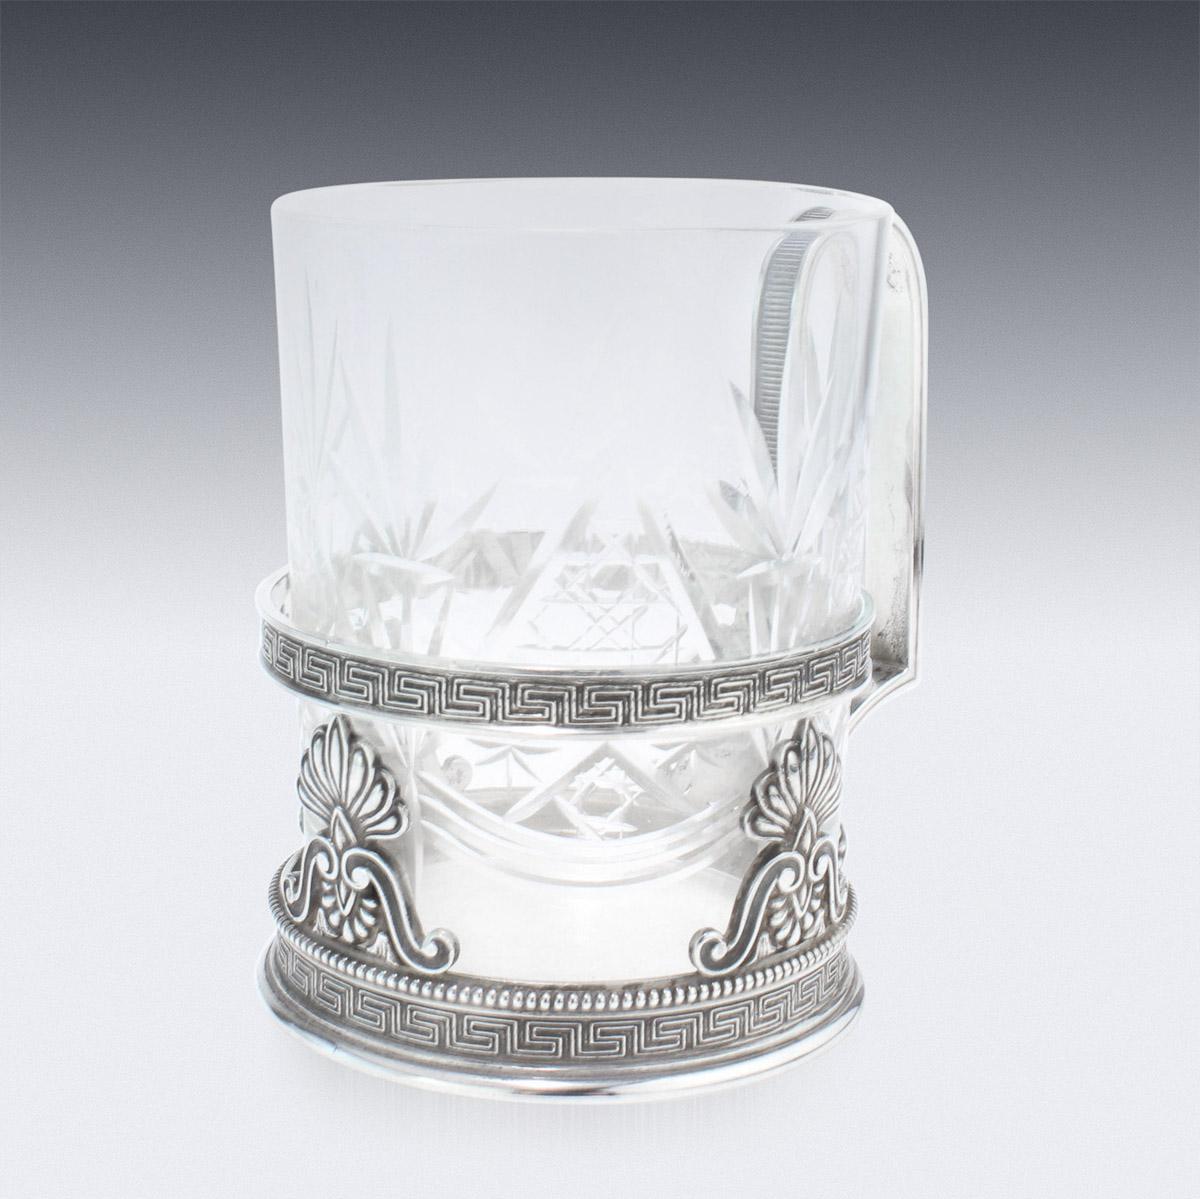 Antique early-20th century Russian Faberge solid silver tea glass holder, made in Imperial style, with Grecian cross-key and beaded boarders, applied with a solid arching scroll handle, and fitted with cut glass cup. Hallmarked silver 84 (875